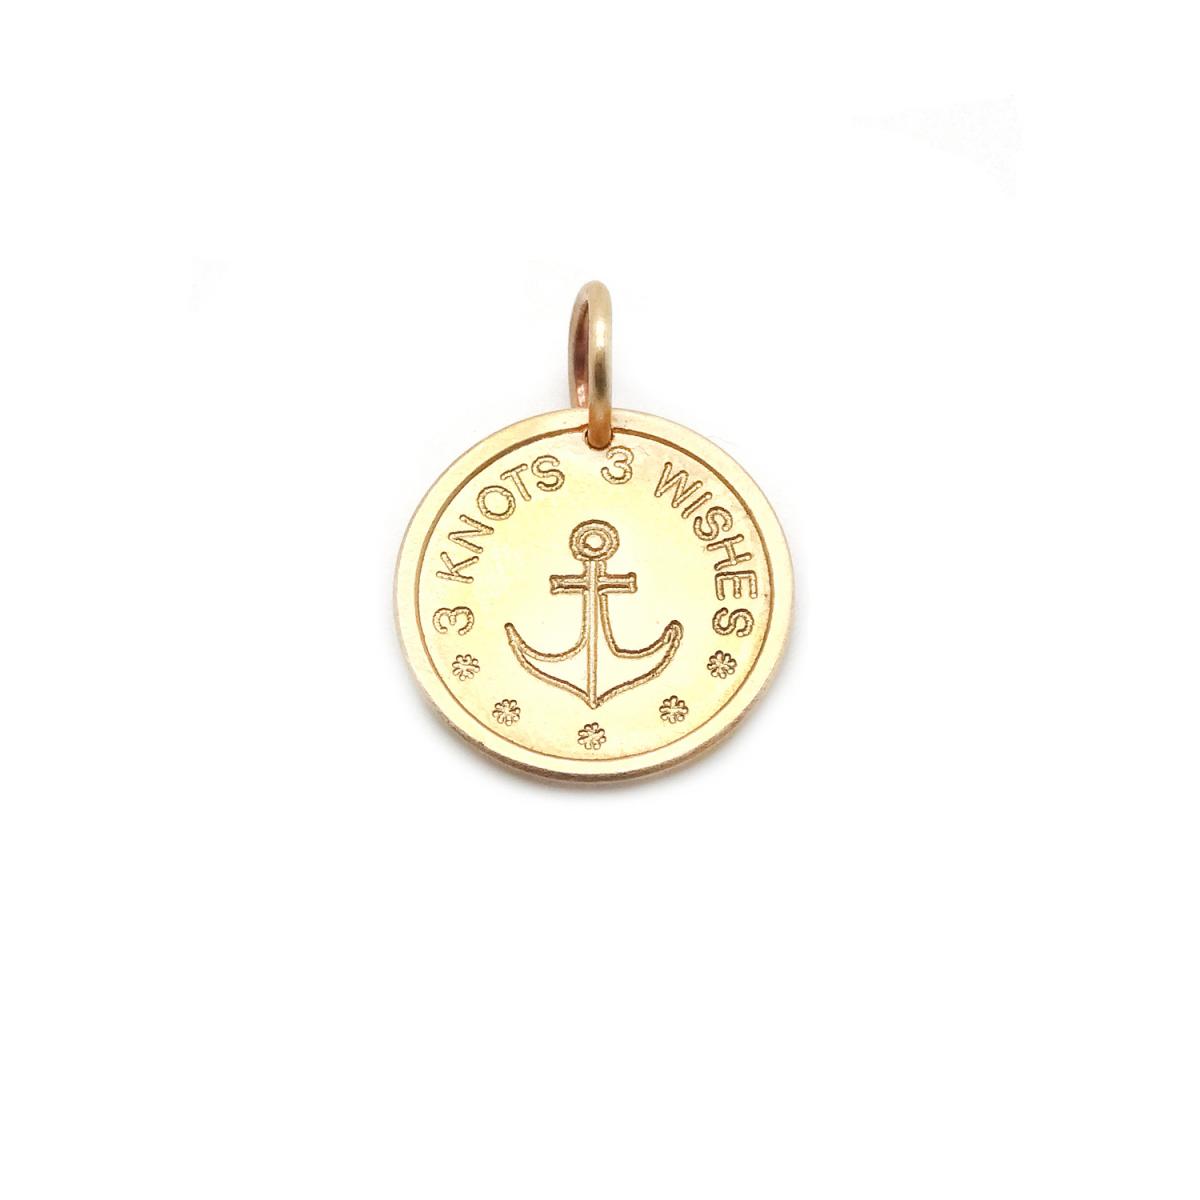 Anchor Bronze Pendant On Meaningful, Colorful Satin Wristband